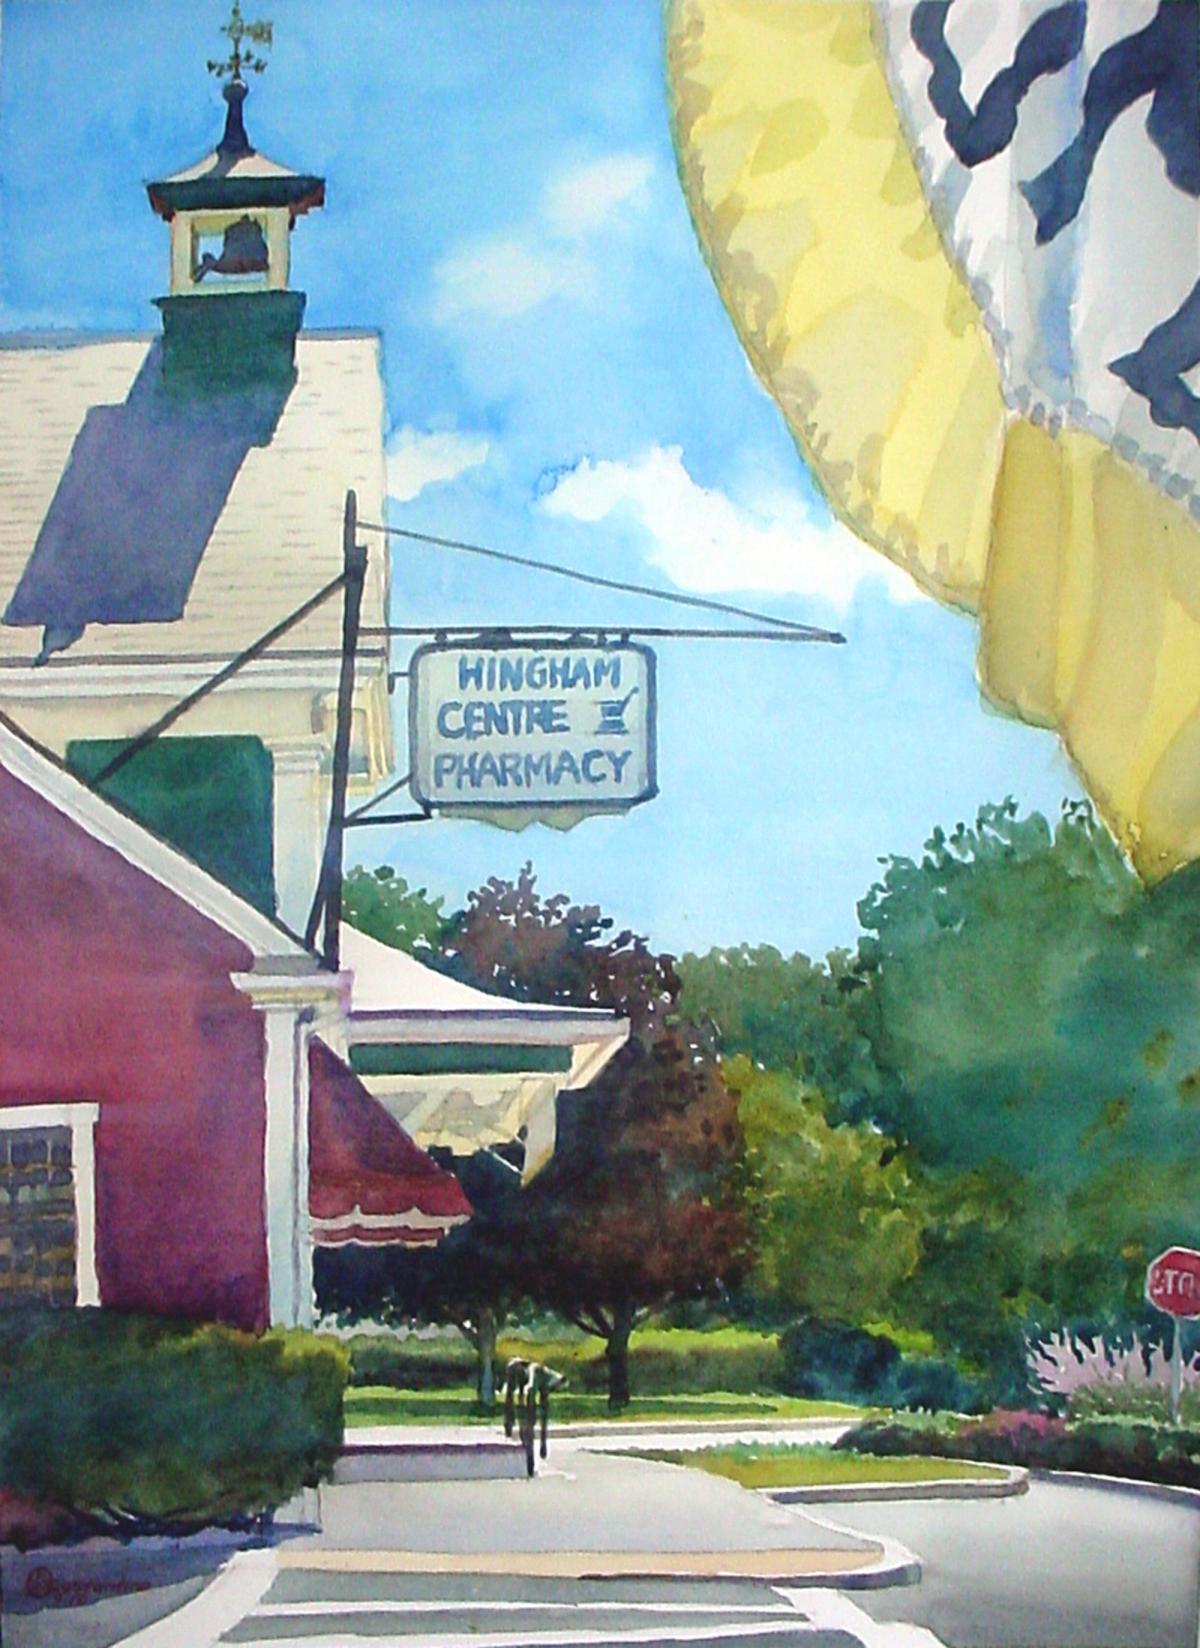 Saturday's Shadow- Centre Pharmacy - en plein air watercolor landscape building painting by Frank Costantino